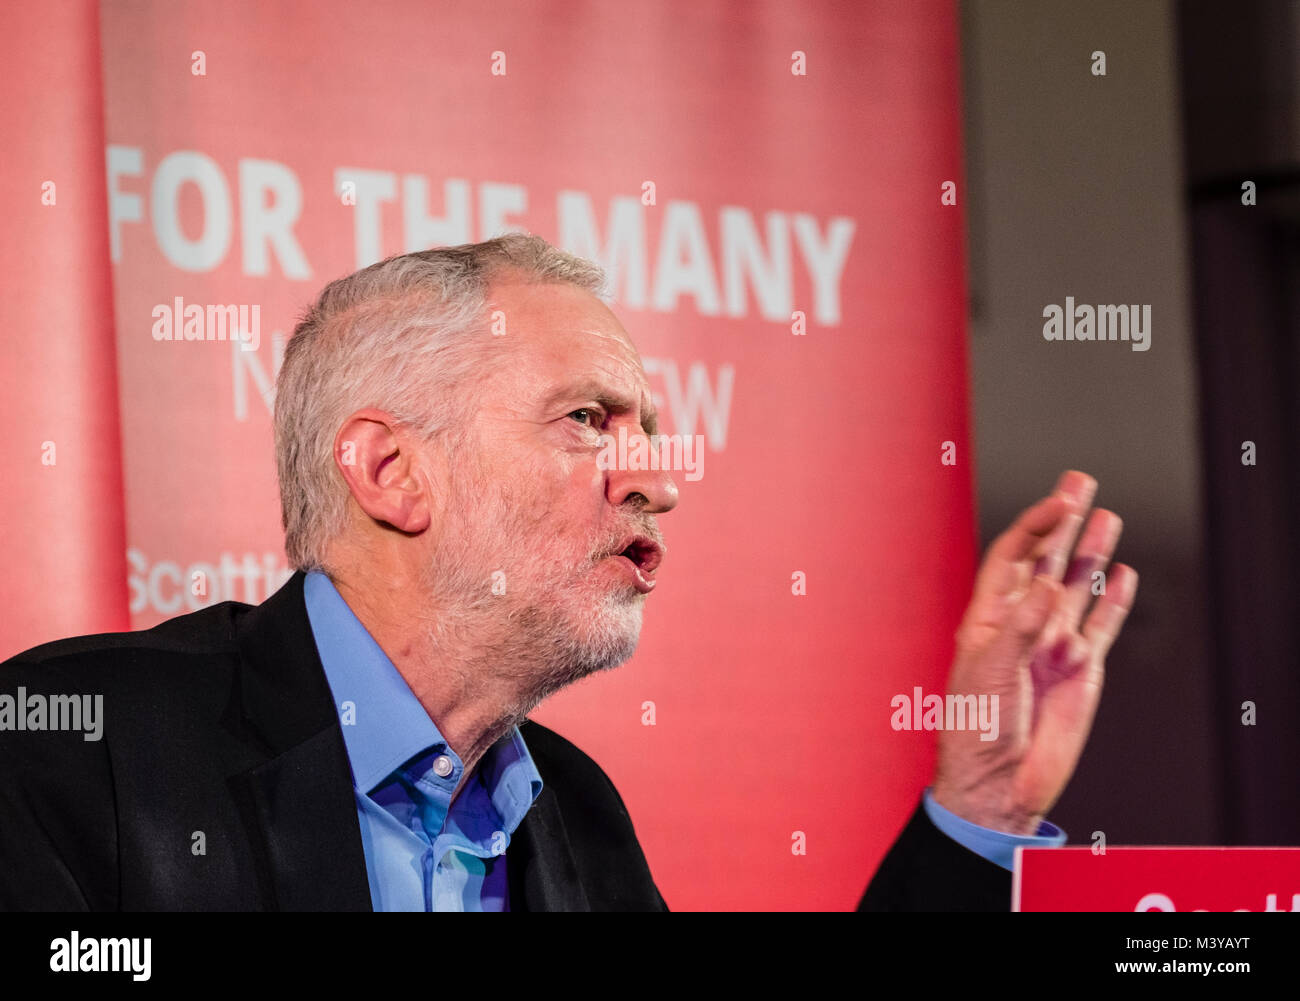 Penicuik, Scotland, United Kingdom, 12 February, 2018. Labour Leader Jeremy Corbyn gives speech at the Shottstown Miners Welfare Hall, Penicuik, Midlothian at the start of a tour of Scotland this week. Credit: Iain Masterton/Alamy Live News Stock Photo